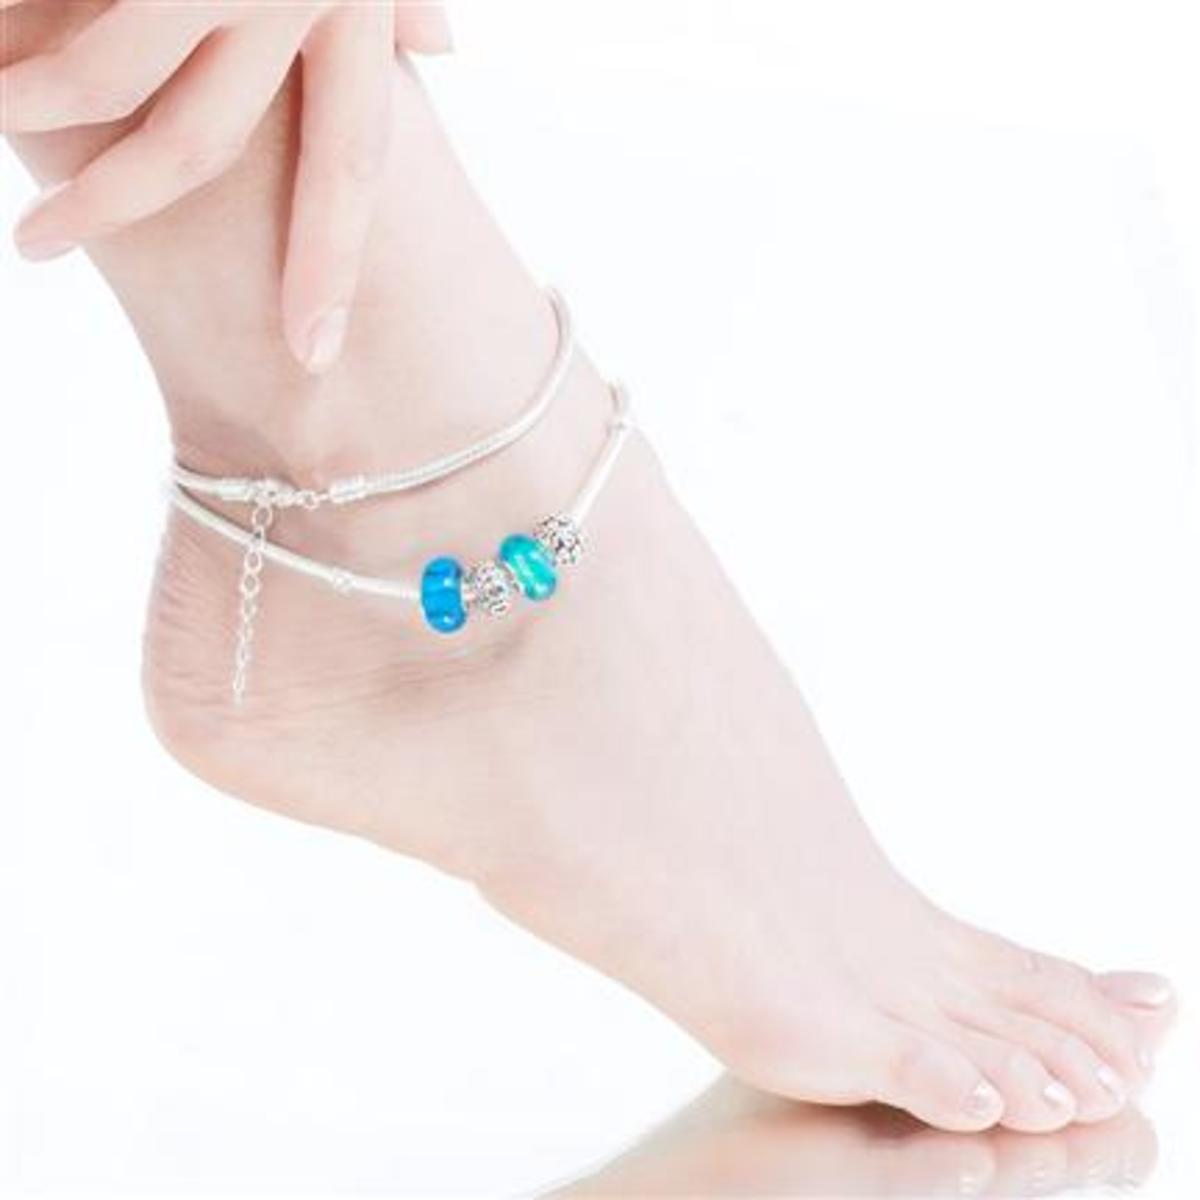 Pandora Anklets Are Going To be Hot This Summer | hubpages